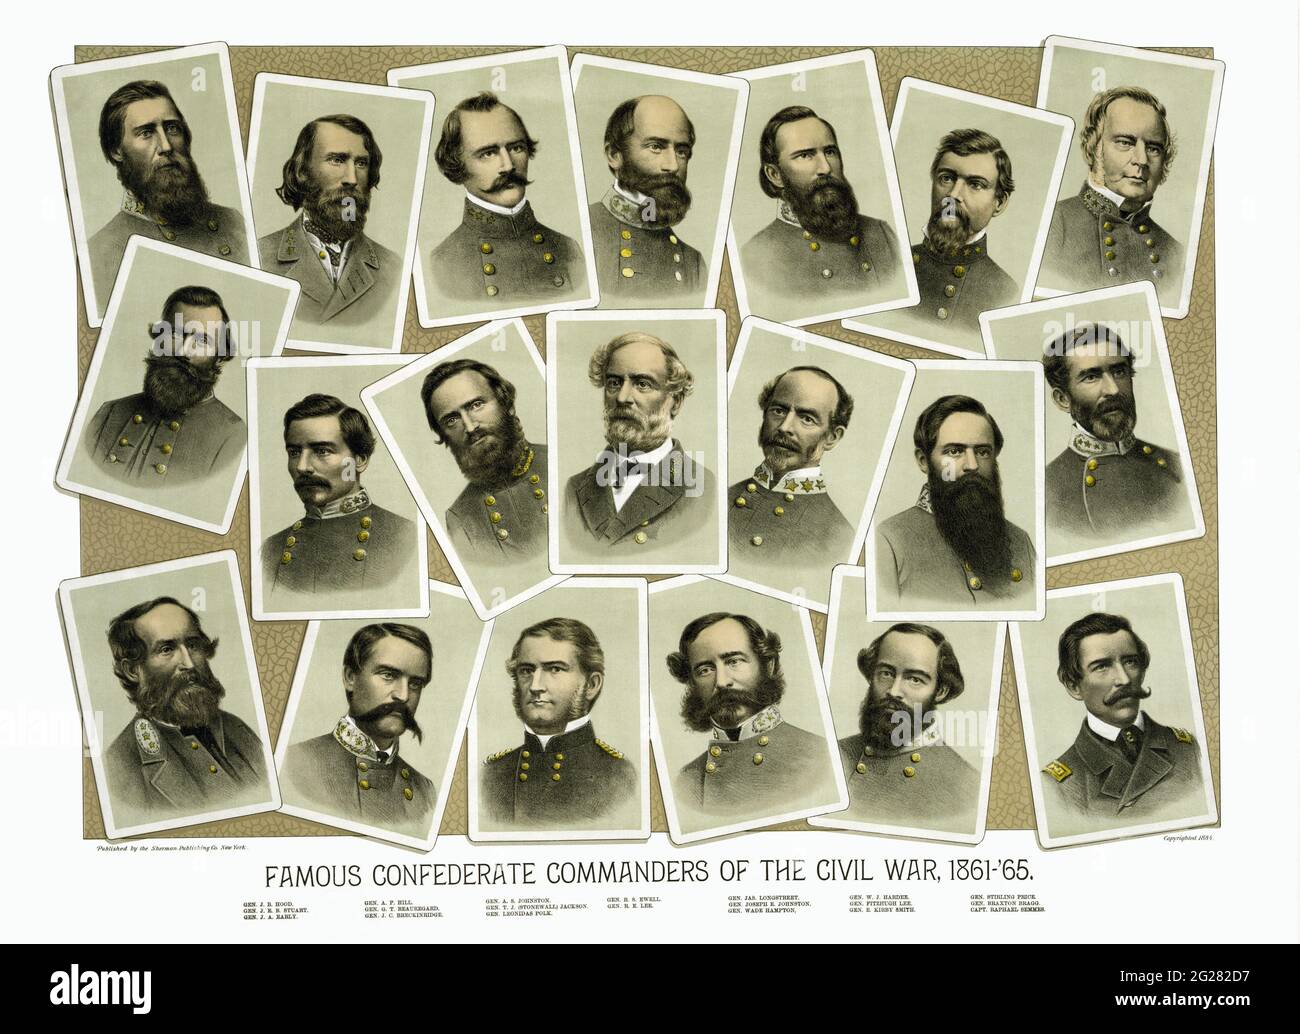 Famous Confederate commanders of the Civil War, 1861-1865. Stock Photo